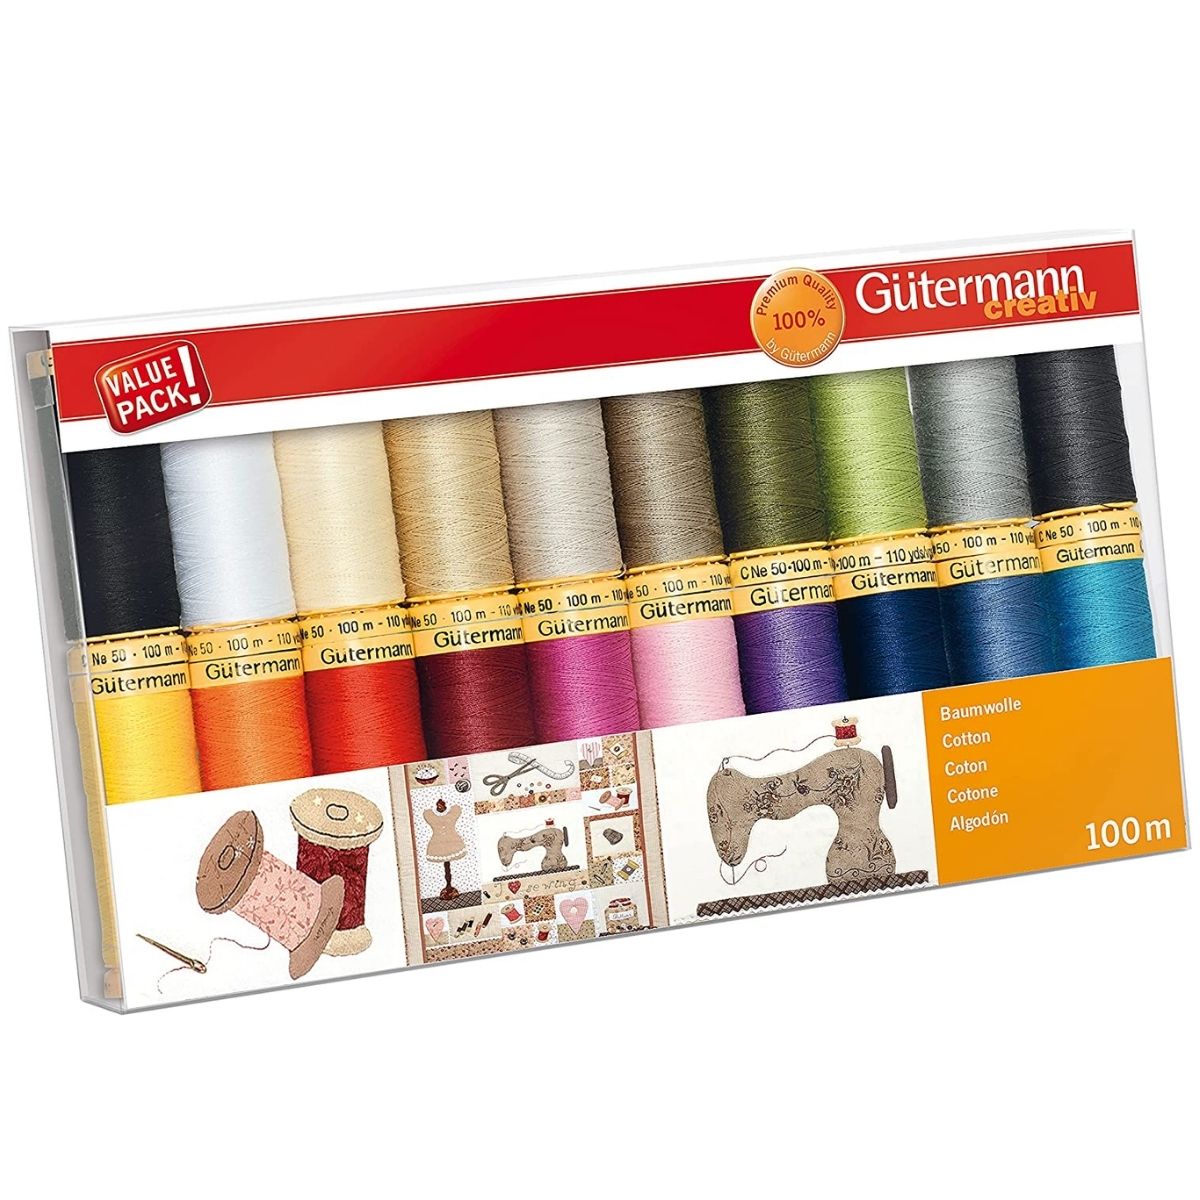 A box of brightly colored Gutermann brand sewing machine thread. Box of thread contains every color from the rainbow neatly wound on a plastic spool